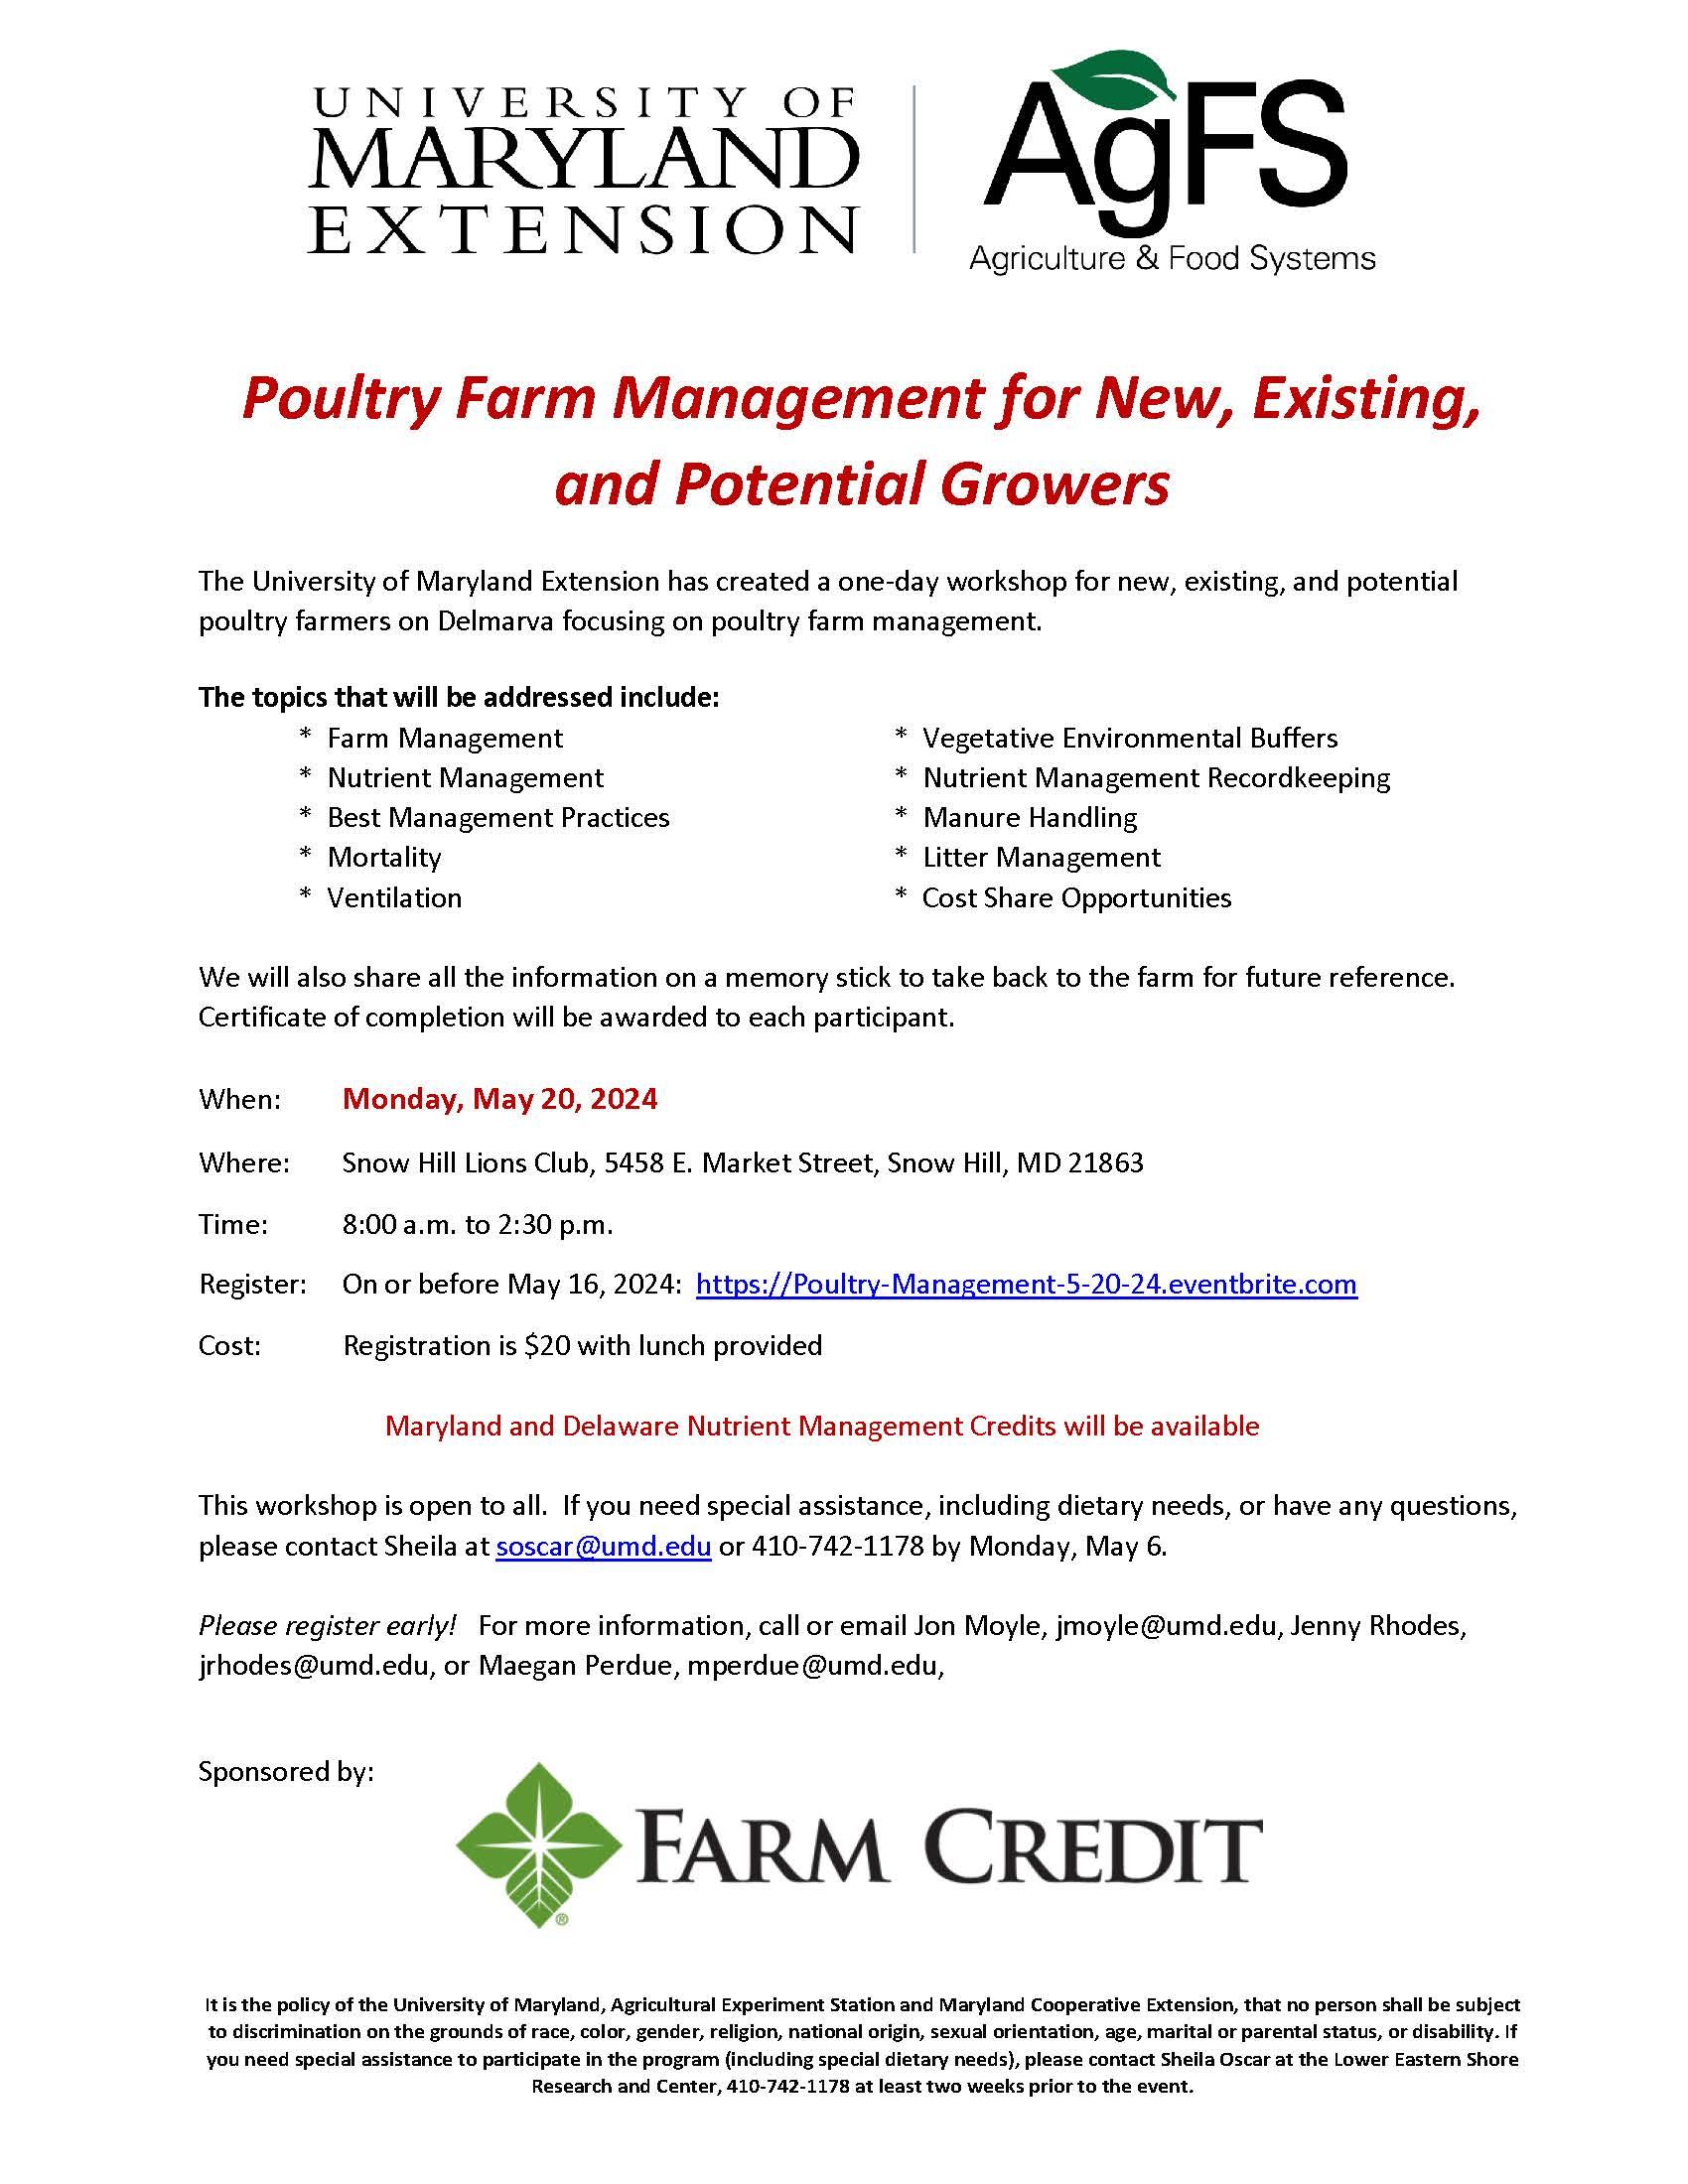 Flyer for May 5, 2024 Poultry Grower Management Workshop